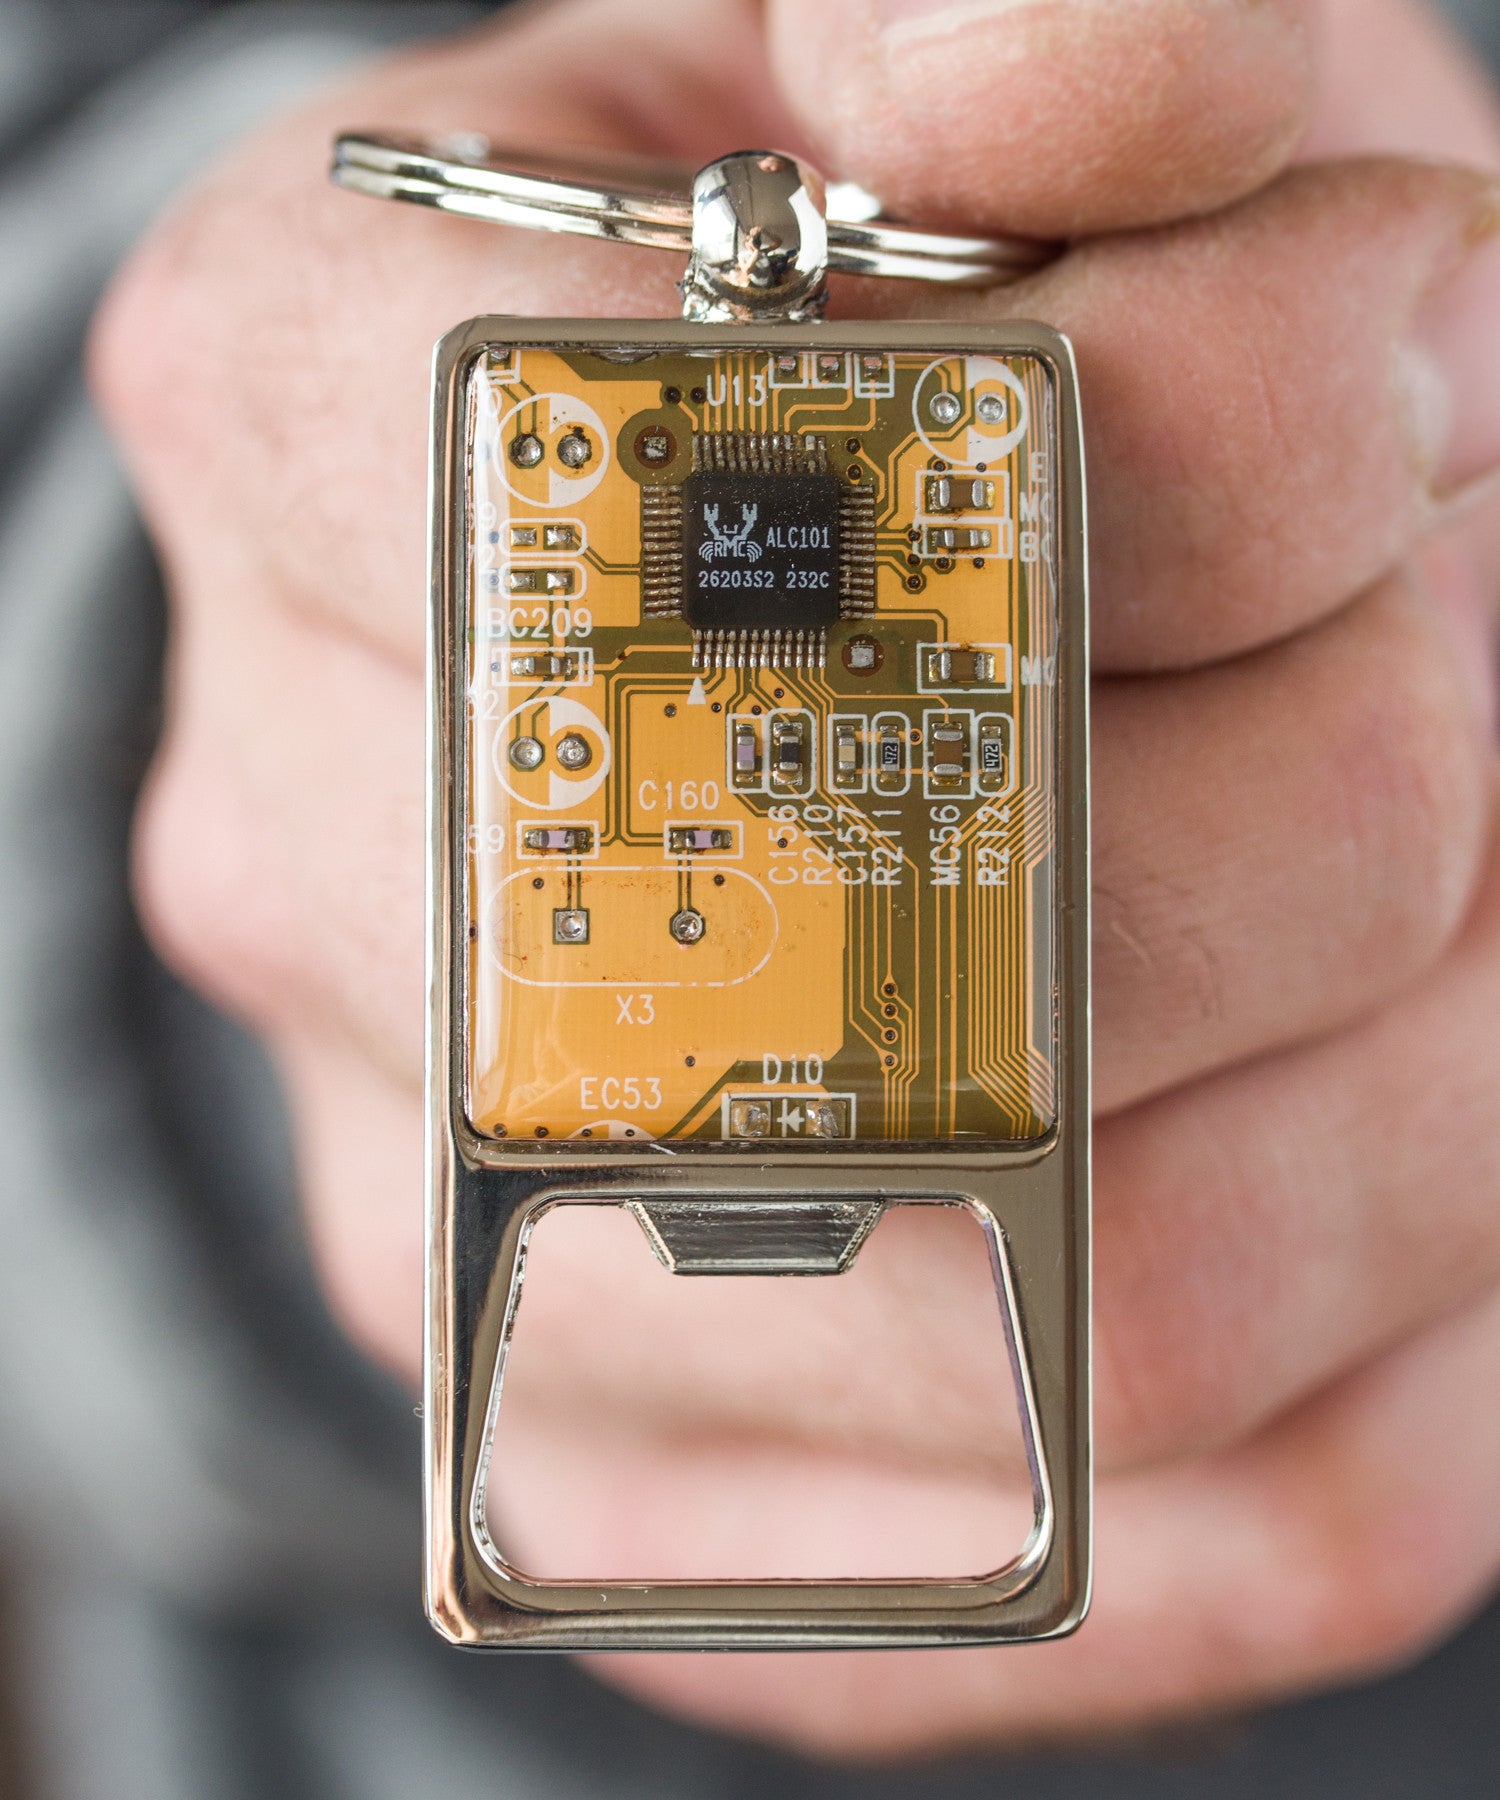 Bottle opener keychain with a circuit board piece